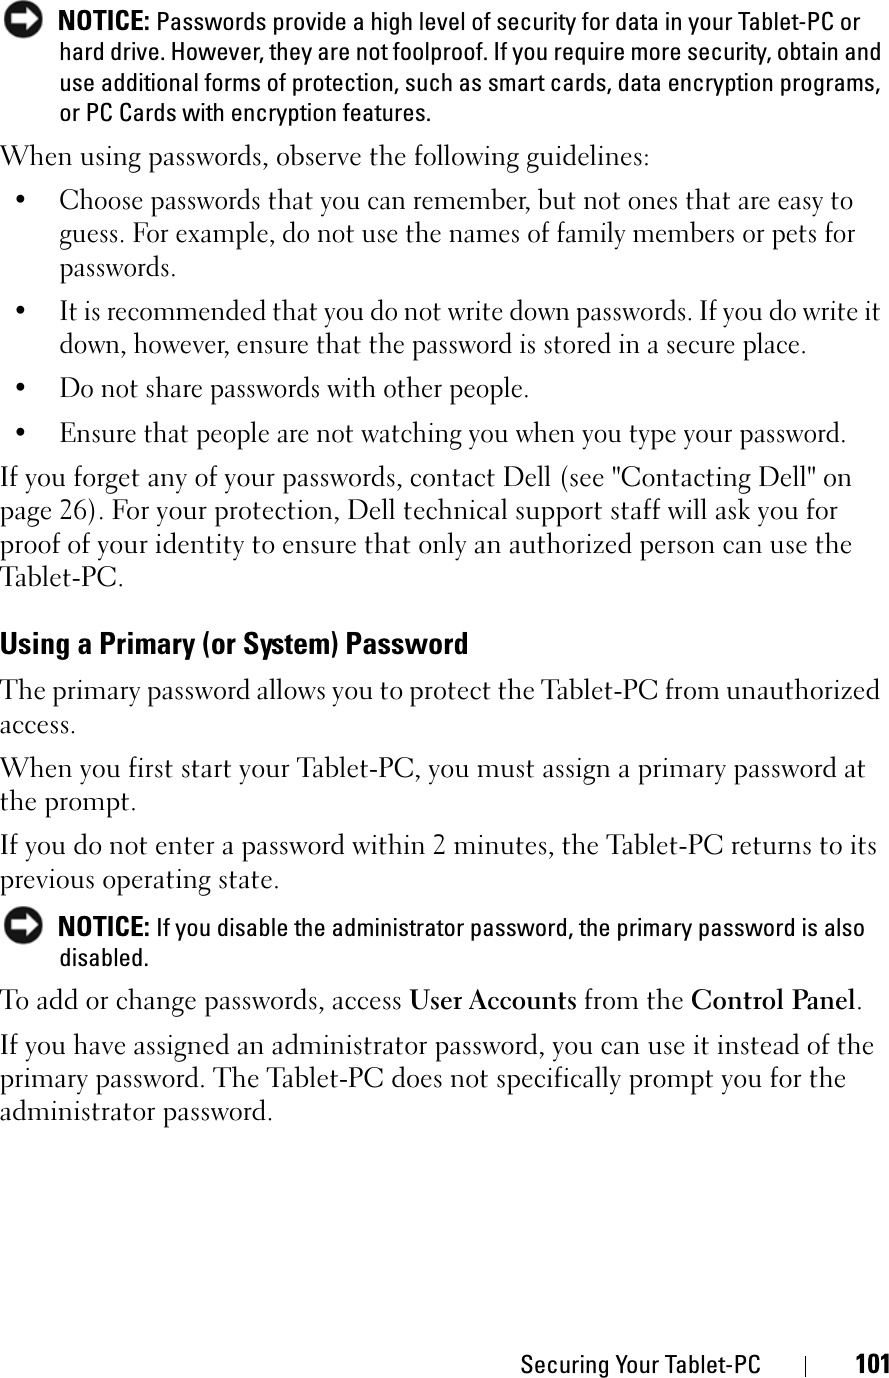 Securing Your Tablet-PC 101NOTICE: Passwords provide a high level of security for data in your Tablet-PC or hard drive. However, they are not foolproof. If you require more security, obtain and use additional forms of protection, such as smart cards, data encryption programs, or PC Cards with encryption features. When using passwords, observe the following guidelines:• Choose passwords that you can remember, but not ones that are easy to guess. For example, do not use the names of family members or pets for passwords.• It is recommended that you do not write down passwords. If you do write it down, however, ensure that the password is stored in a secure place.• Do not share passwords with other people.• Ensure that people are not watching you when you type your password.If you forget any of your passwords, contact Dell (see &quot;Contacting Dell&quot; on page 26). For your protection, Dell technical support staff will ask you for proof of your identity to ensure that only an authorized person can use the Tab le t - P C .Using a Primary (or System) PasswordThe primary password allows you to protect the Tablet-PC from unauthorized access.When you first start your Tablet-PC, you must assign a primary password at the prompt.If you do not enter a password within 2 minutes, the Tablet-PC returns to its previous operating state.NOTICE: If you disable the administrator password, the primary password is also disabled.To add or change passwords, access User Accounts from the Control Panel.If you have assigned an administrator password, you can use it instead of the primary password. The Tablet-PC does not specifically prompt you for the administrator password.